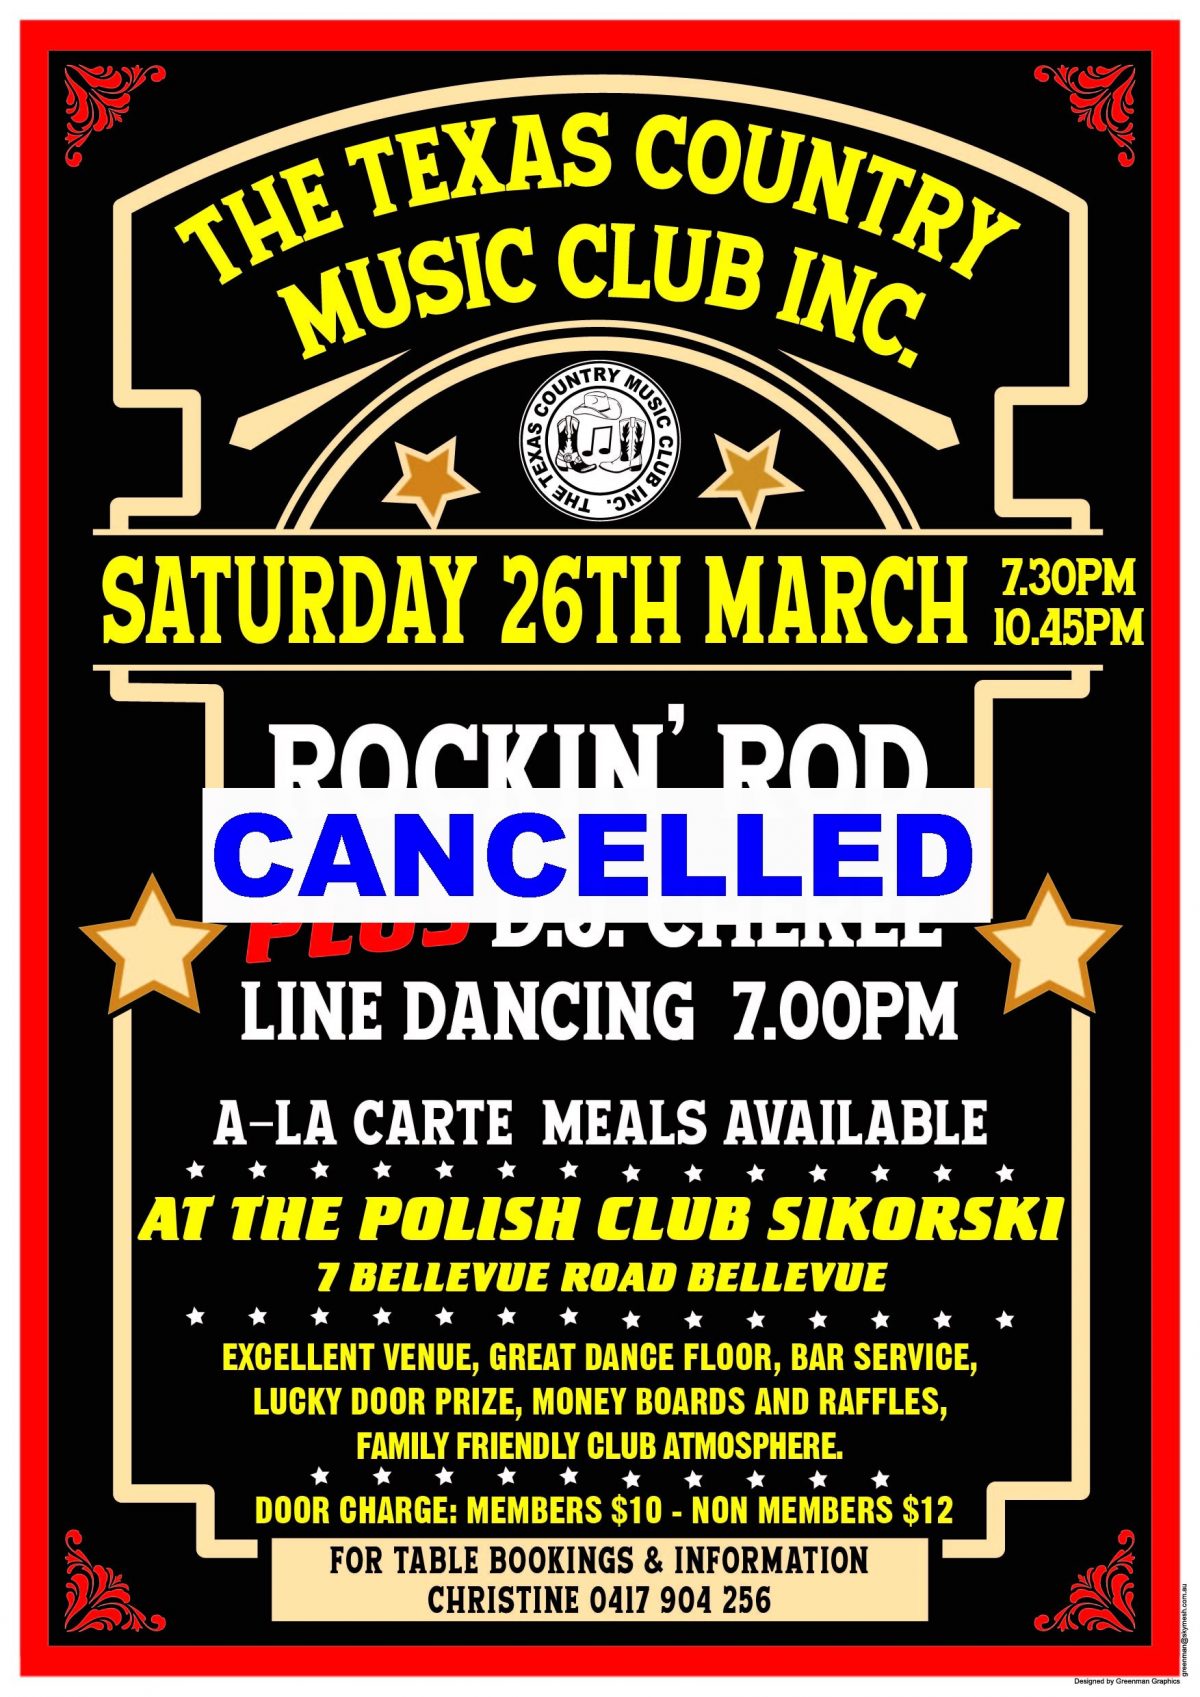 Night Party Texas Style – Saturday 26 March 2022 CANCELLED 🗓